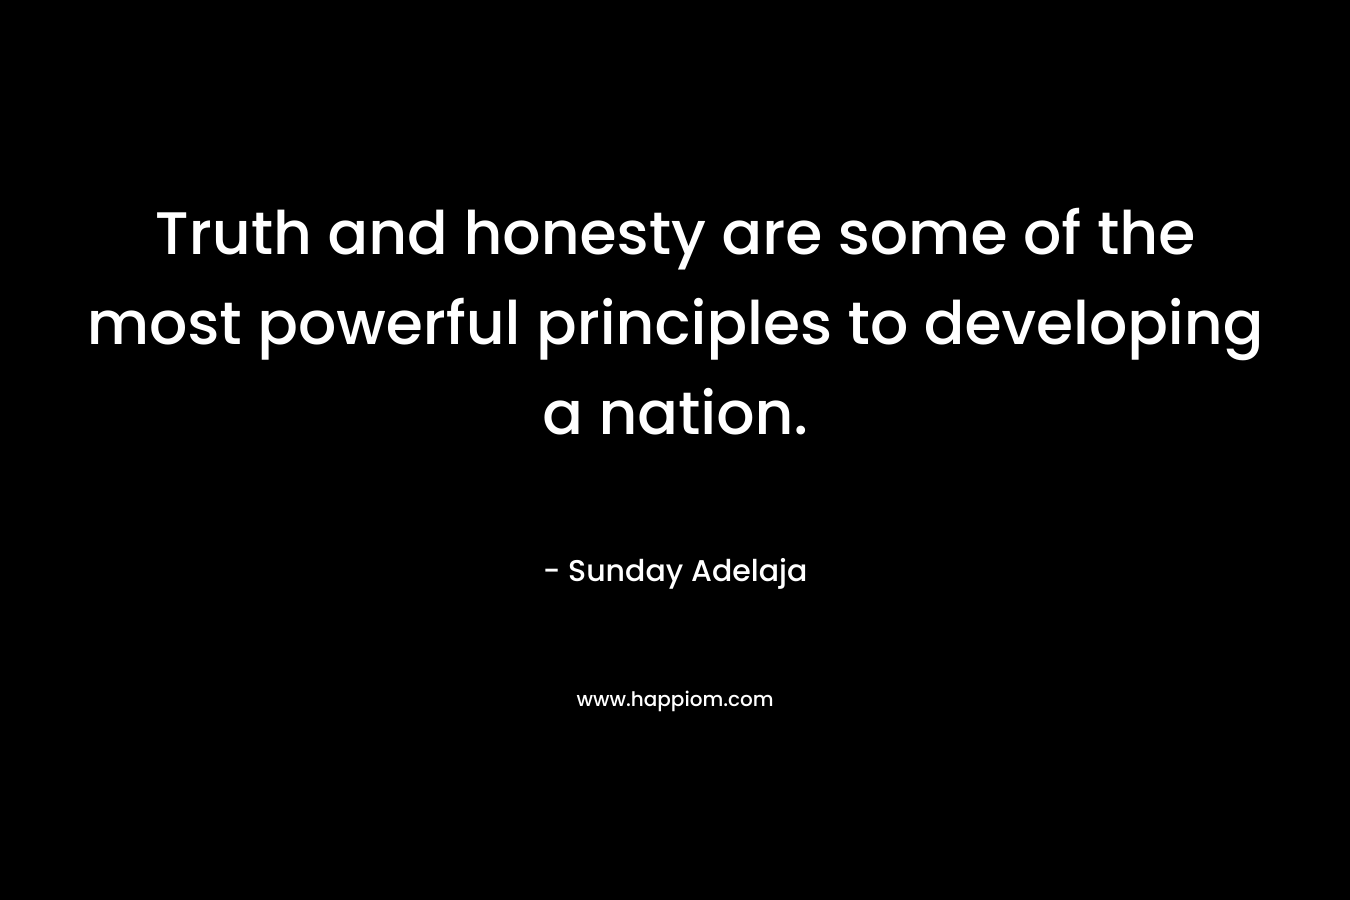 Truth and honesty are some of the most powerful principles to developing a nation.